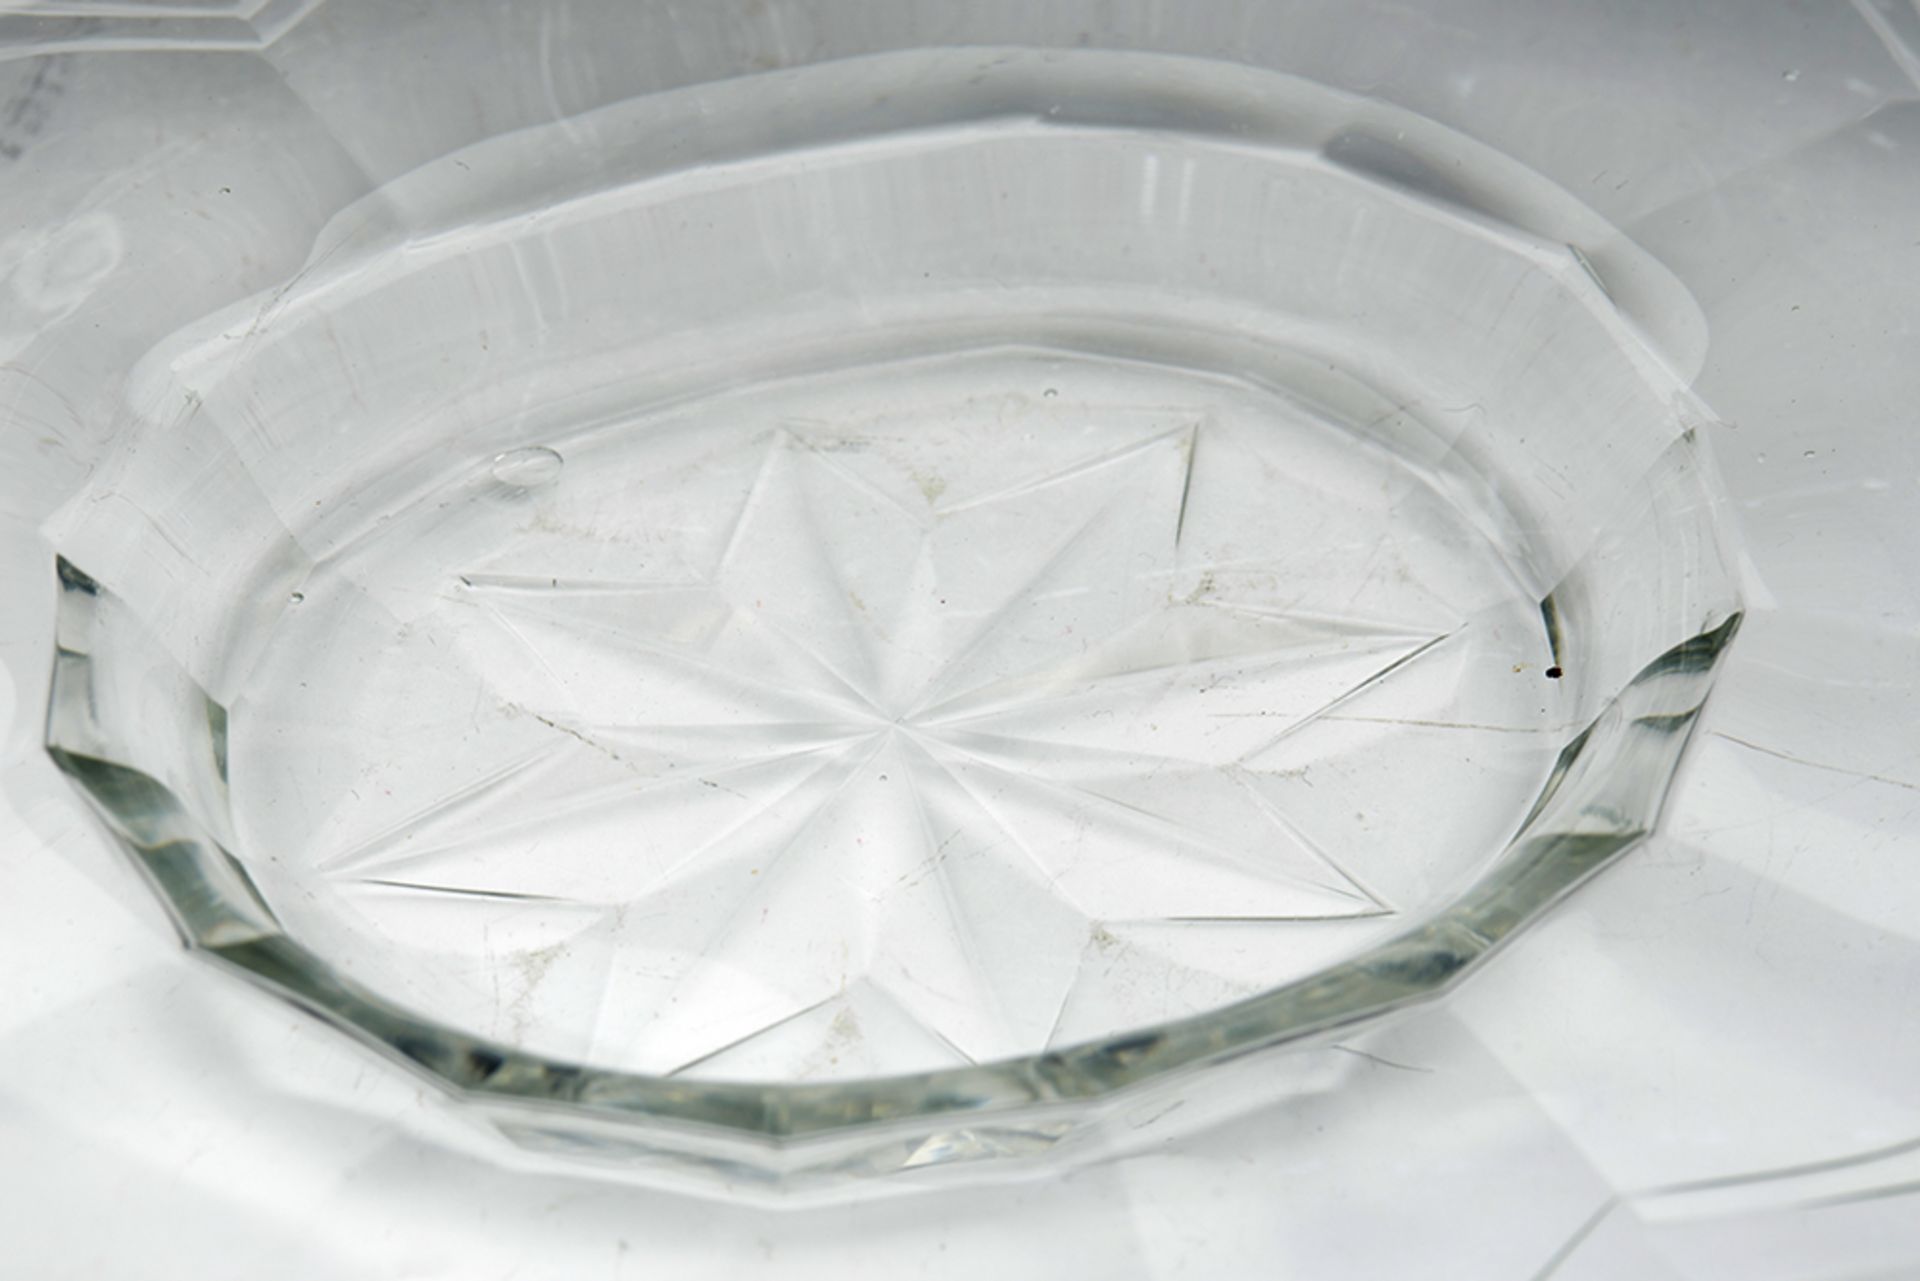 ANTIQUE CUT GLASS LIDDED BUTTER DISH AND STAND EARLY 19TH C.   DIMENSIONS   Height 19cm, Length 25, - Image 7 of 15